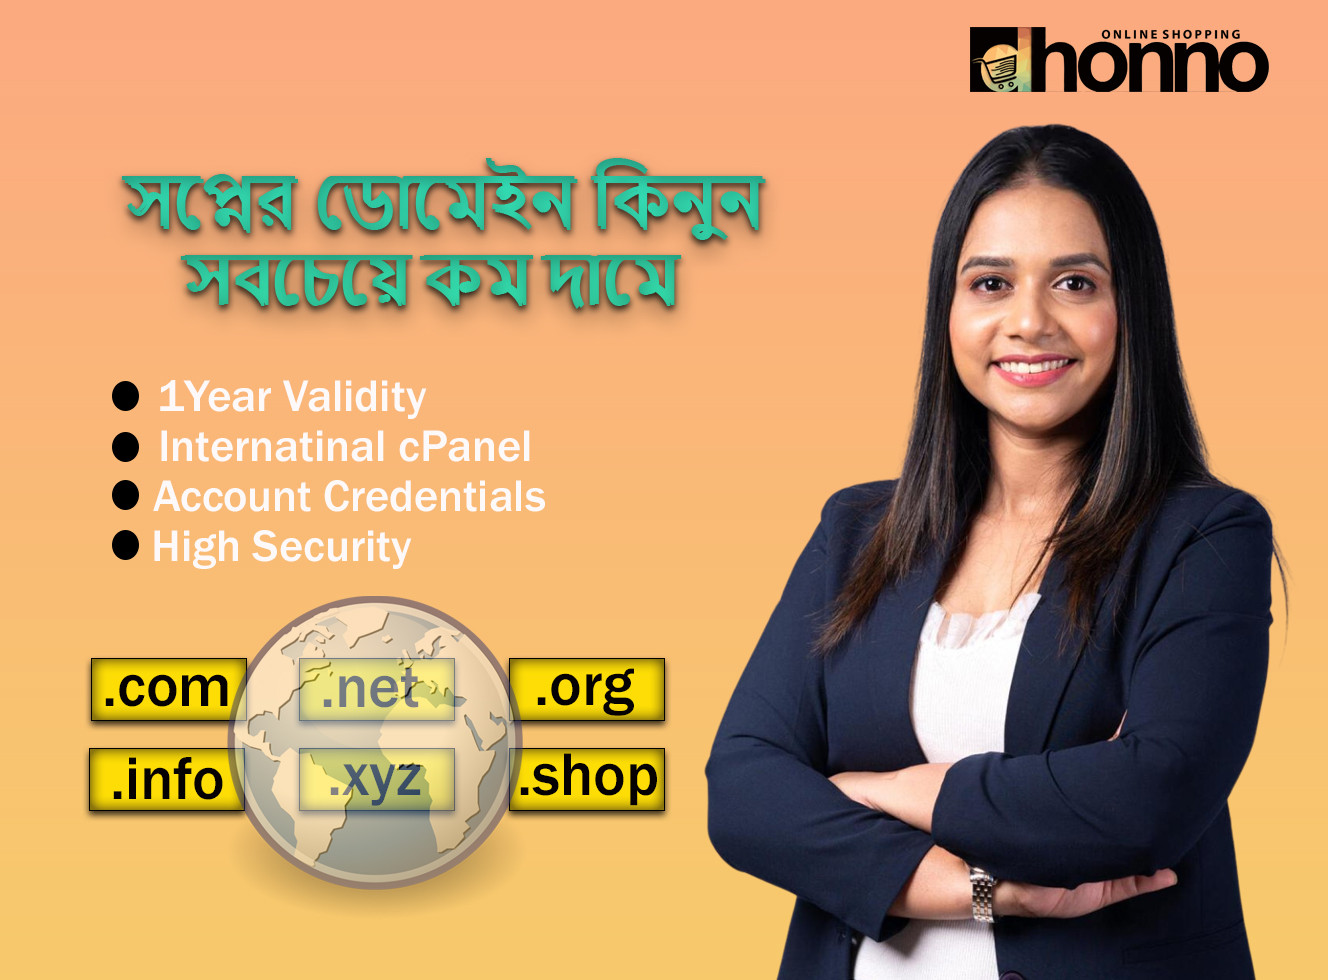 Dhonno Shopping Mall promo